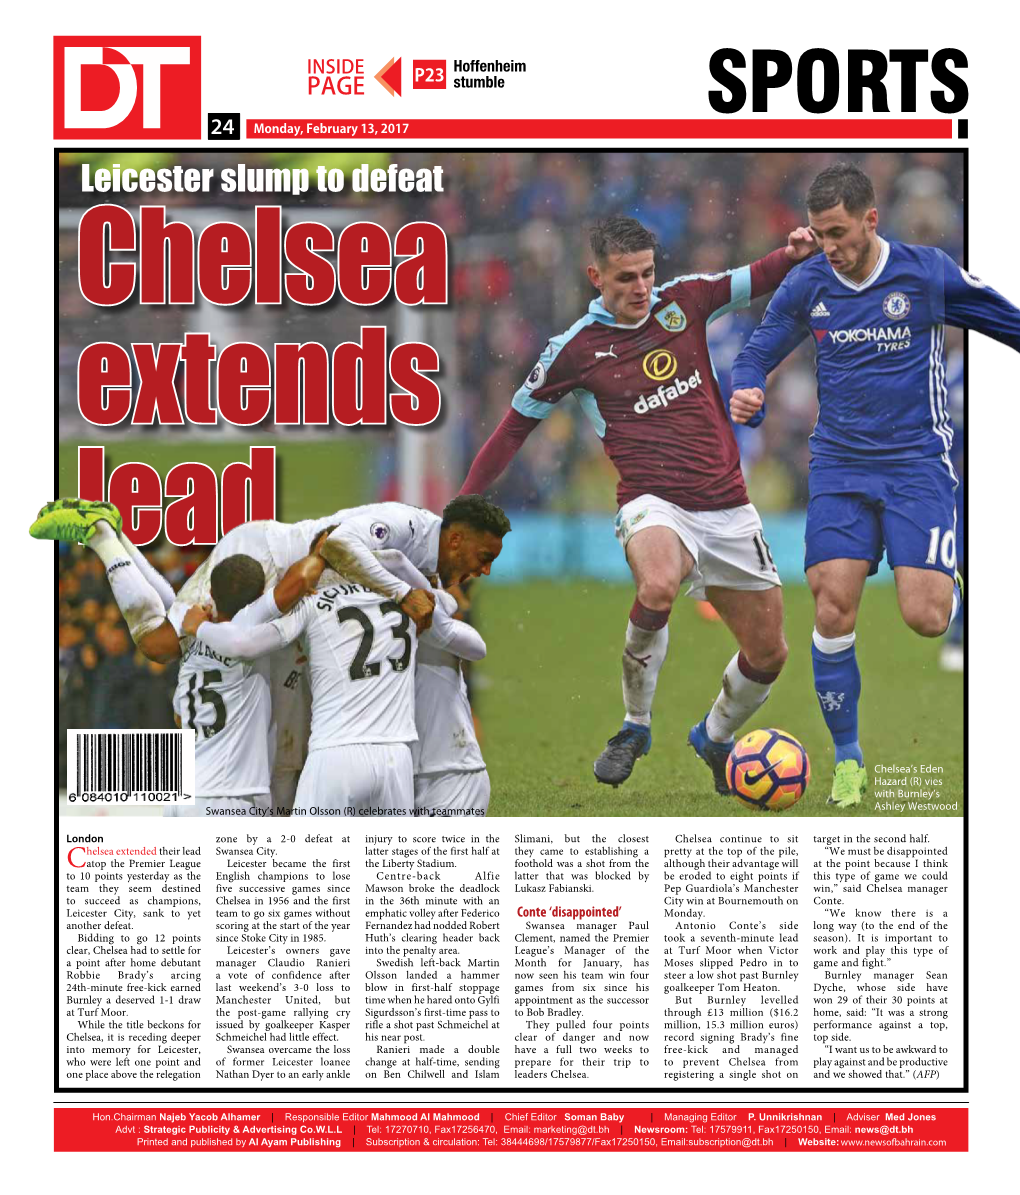 SPORTS 2424 Monday, February 13, 2017 Leicester Slump to Defeat Chelsea Extends Lead